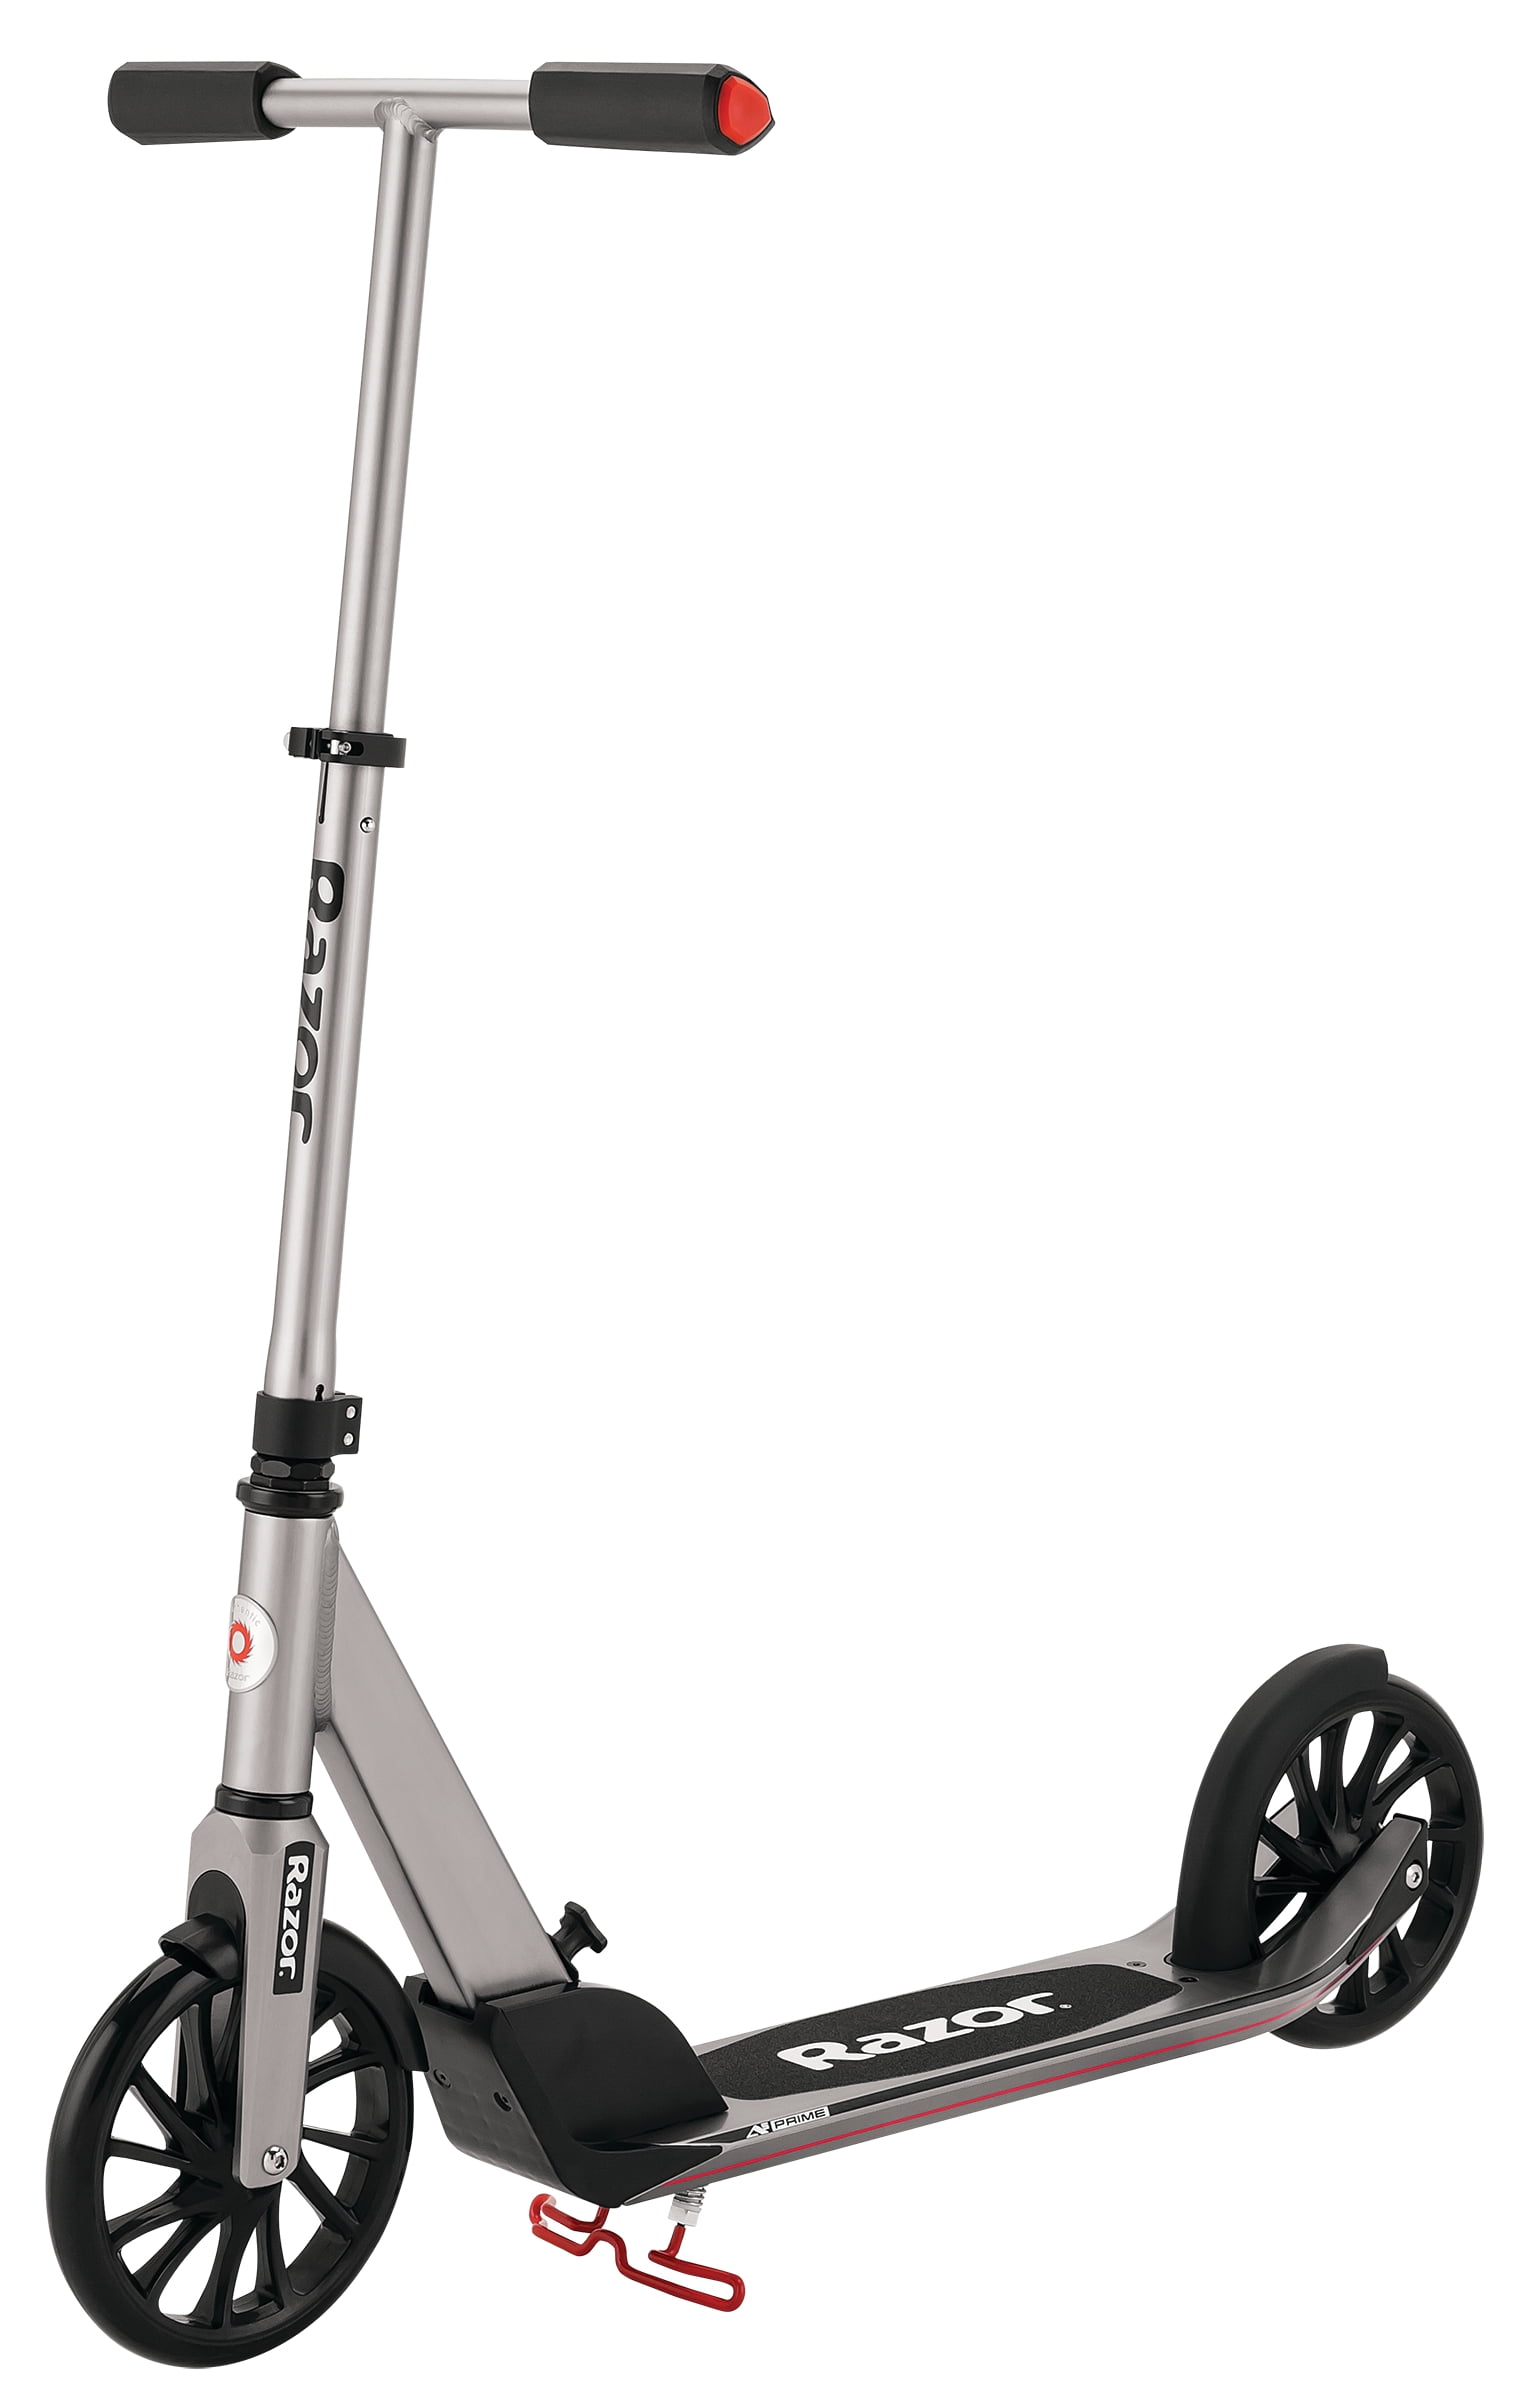 Razor A5 Carbon Lux Kick Scooter Black Extra-large Wheels Fun Ride Best Gift NEW 